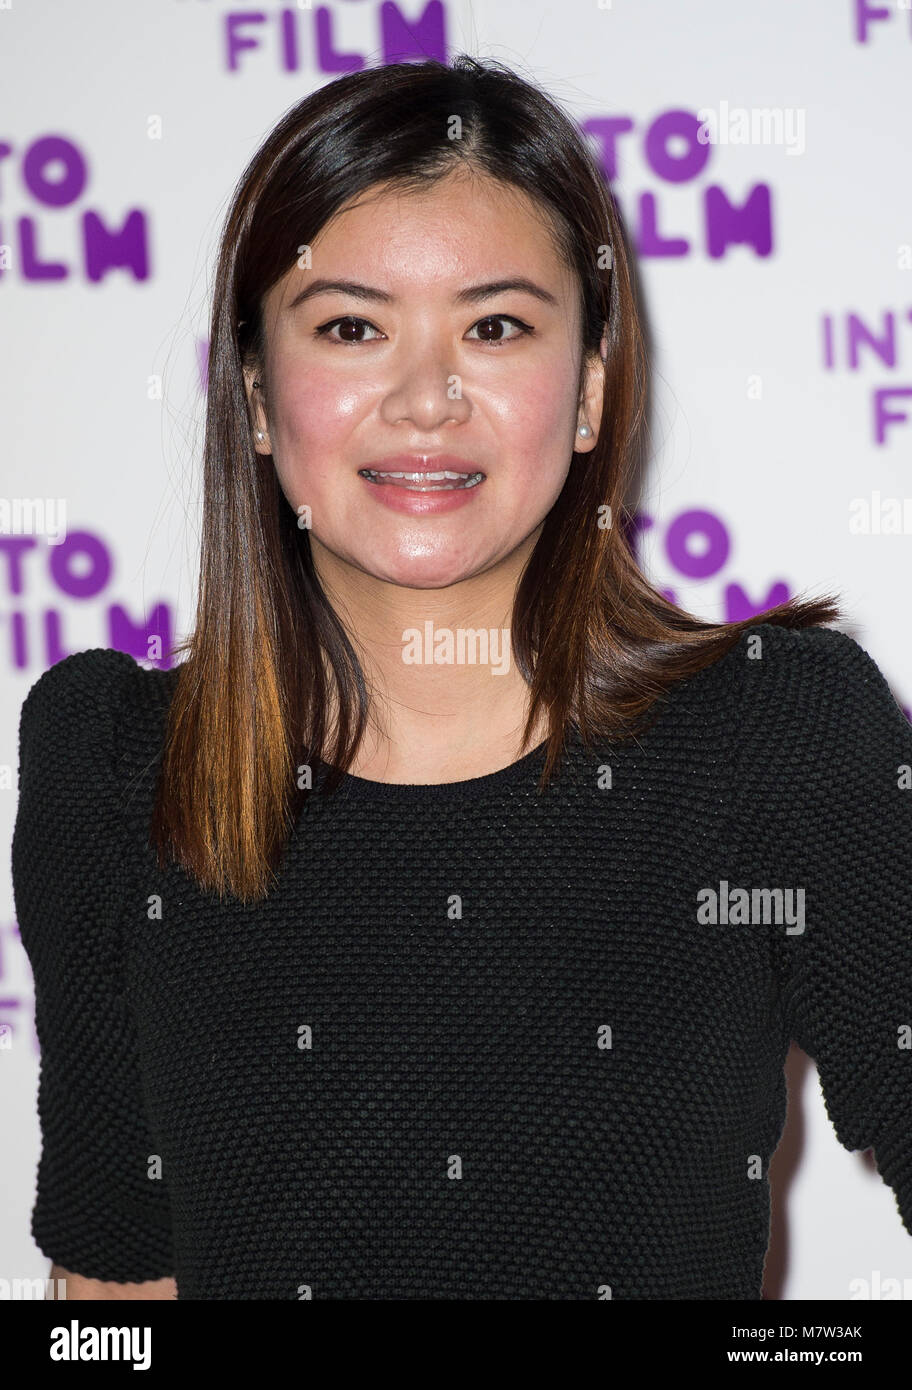 London, UK. 13th March, 2018.  Katie Leung attends the Into Film Awards at BFI Southbank on March 13, 2018 in London, England. Credit: Gary Mitchell, GMP Media/Alamy Live News Stock Photo